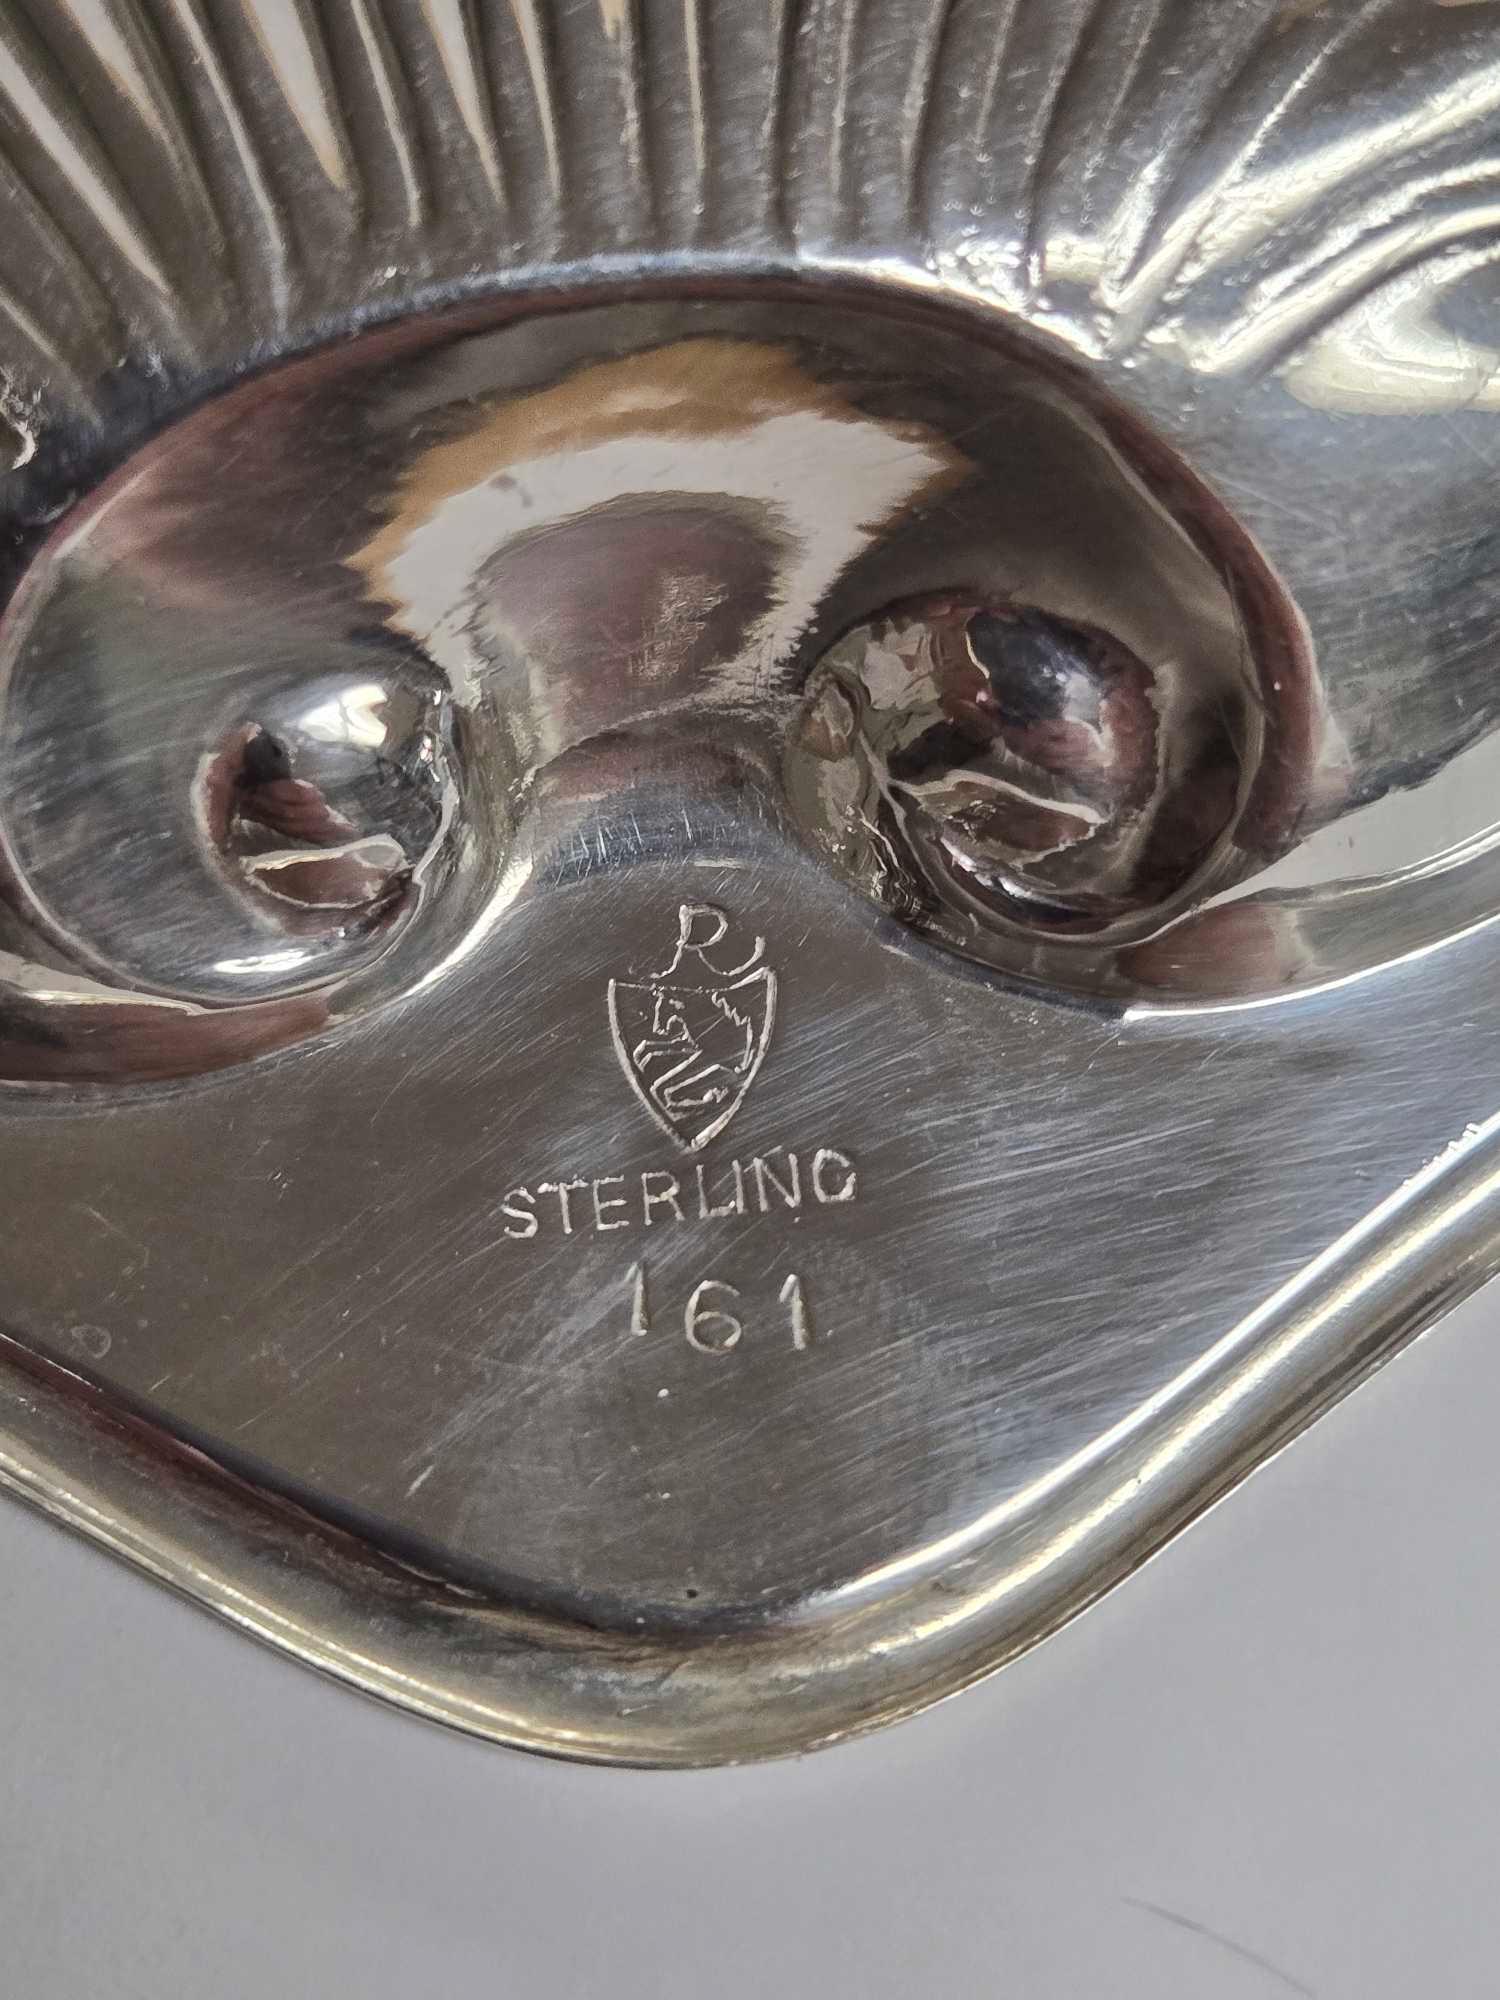 Collection of Sterling Silver Items